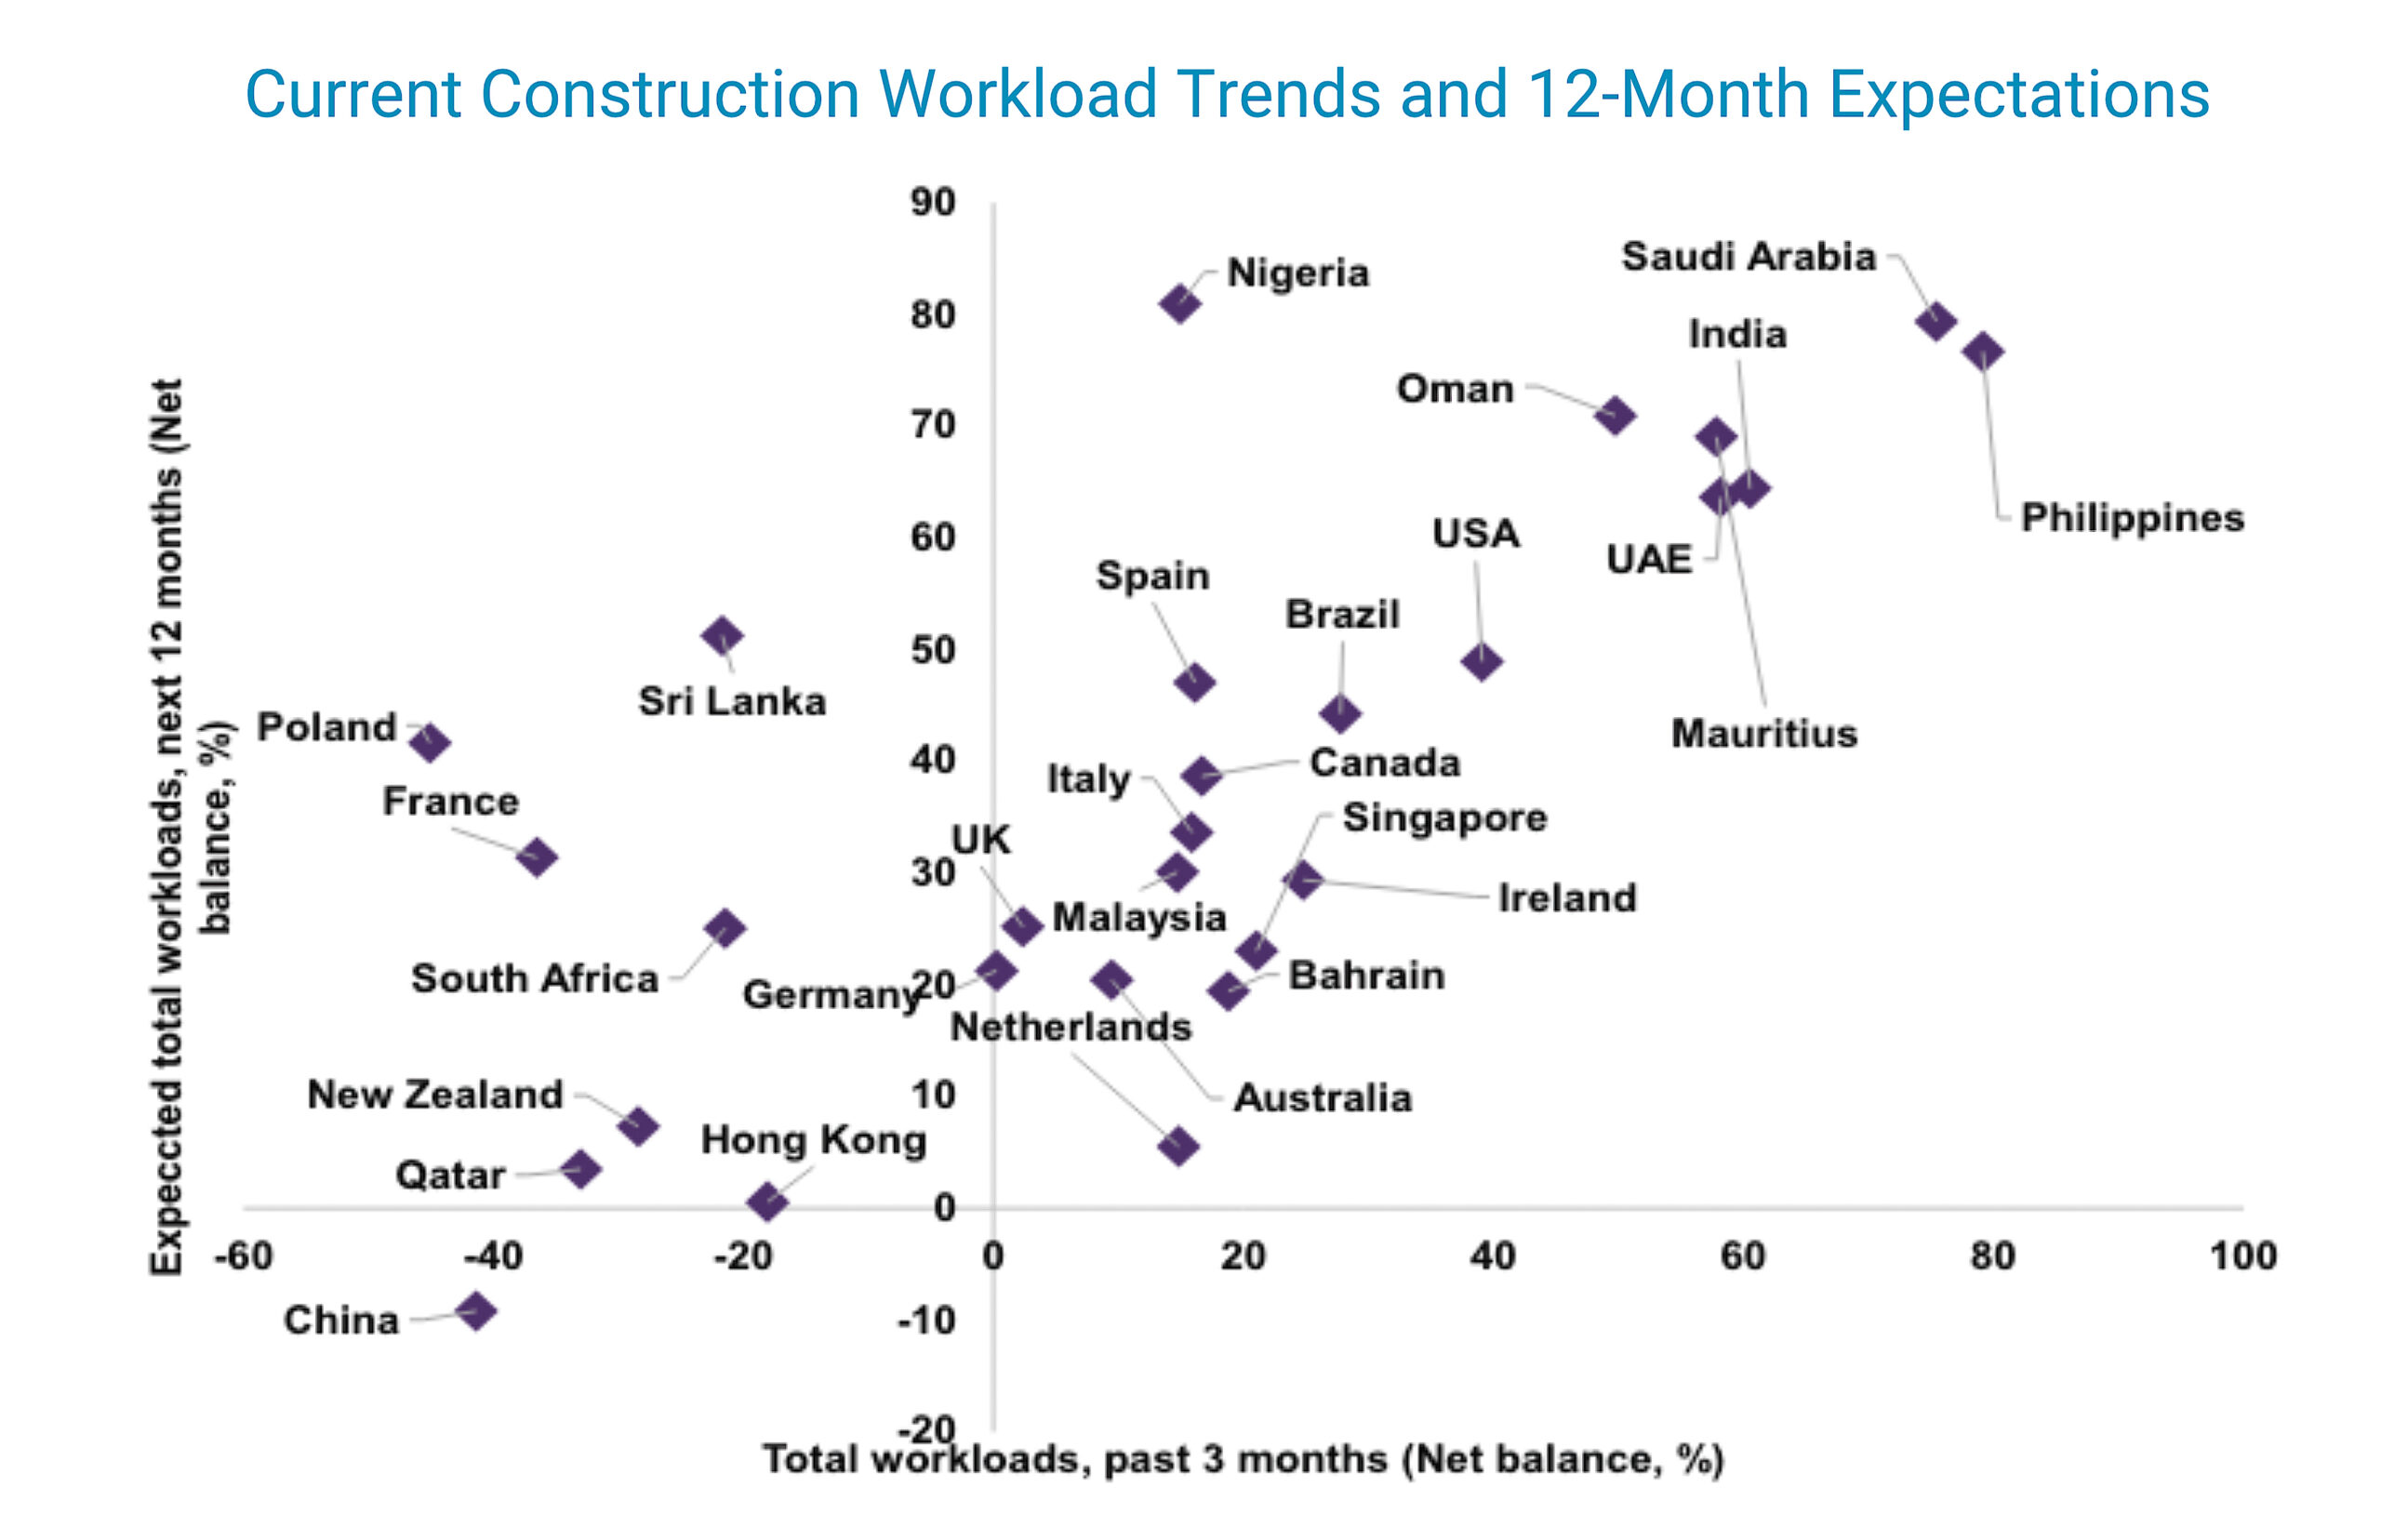 Construction work planned and outlook in Saudi Arabia